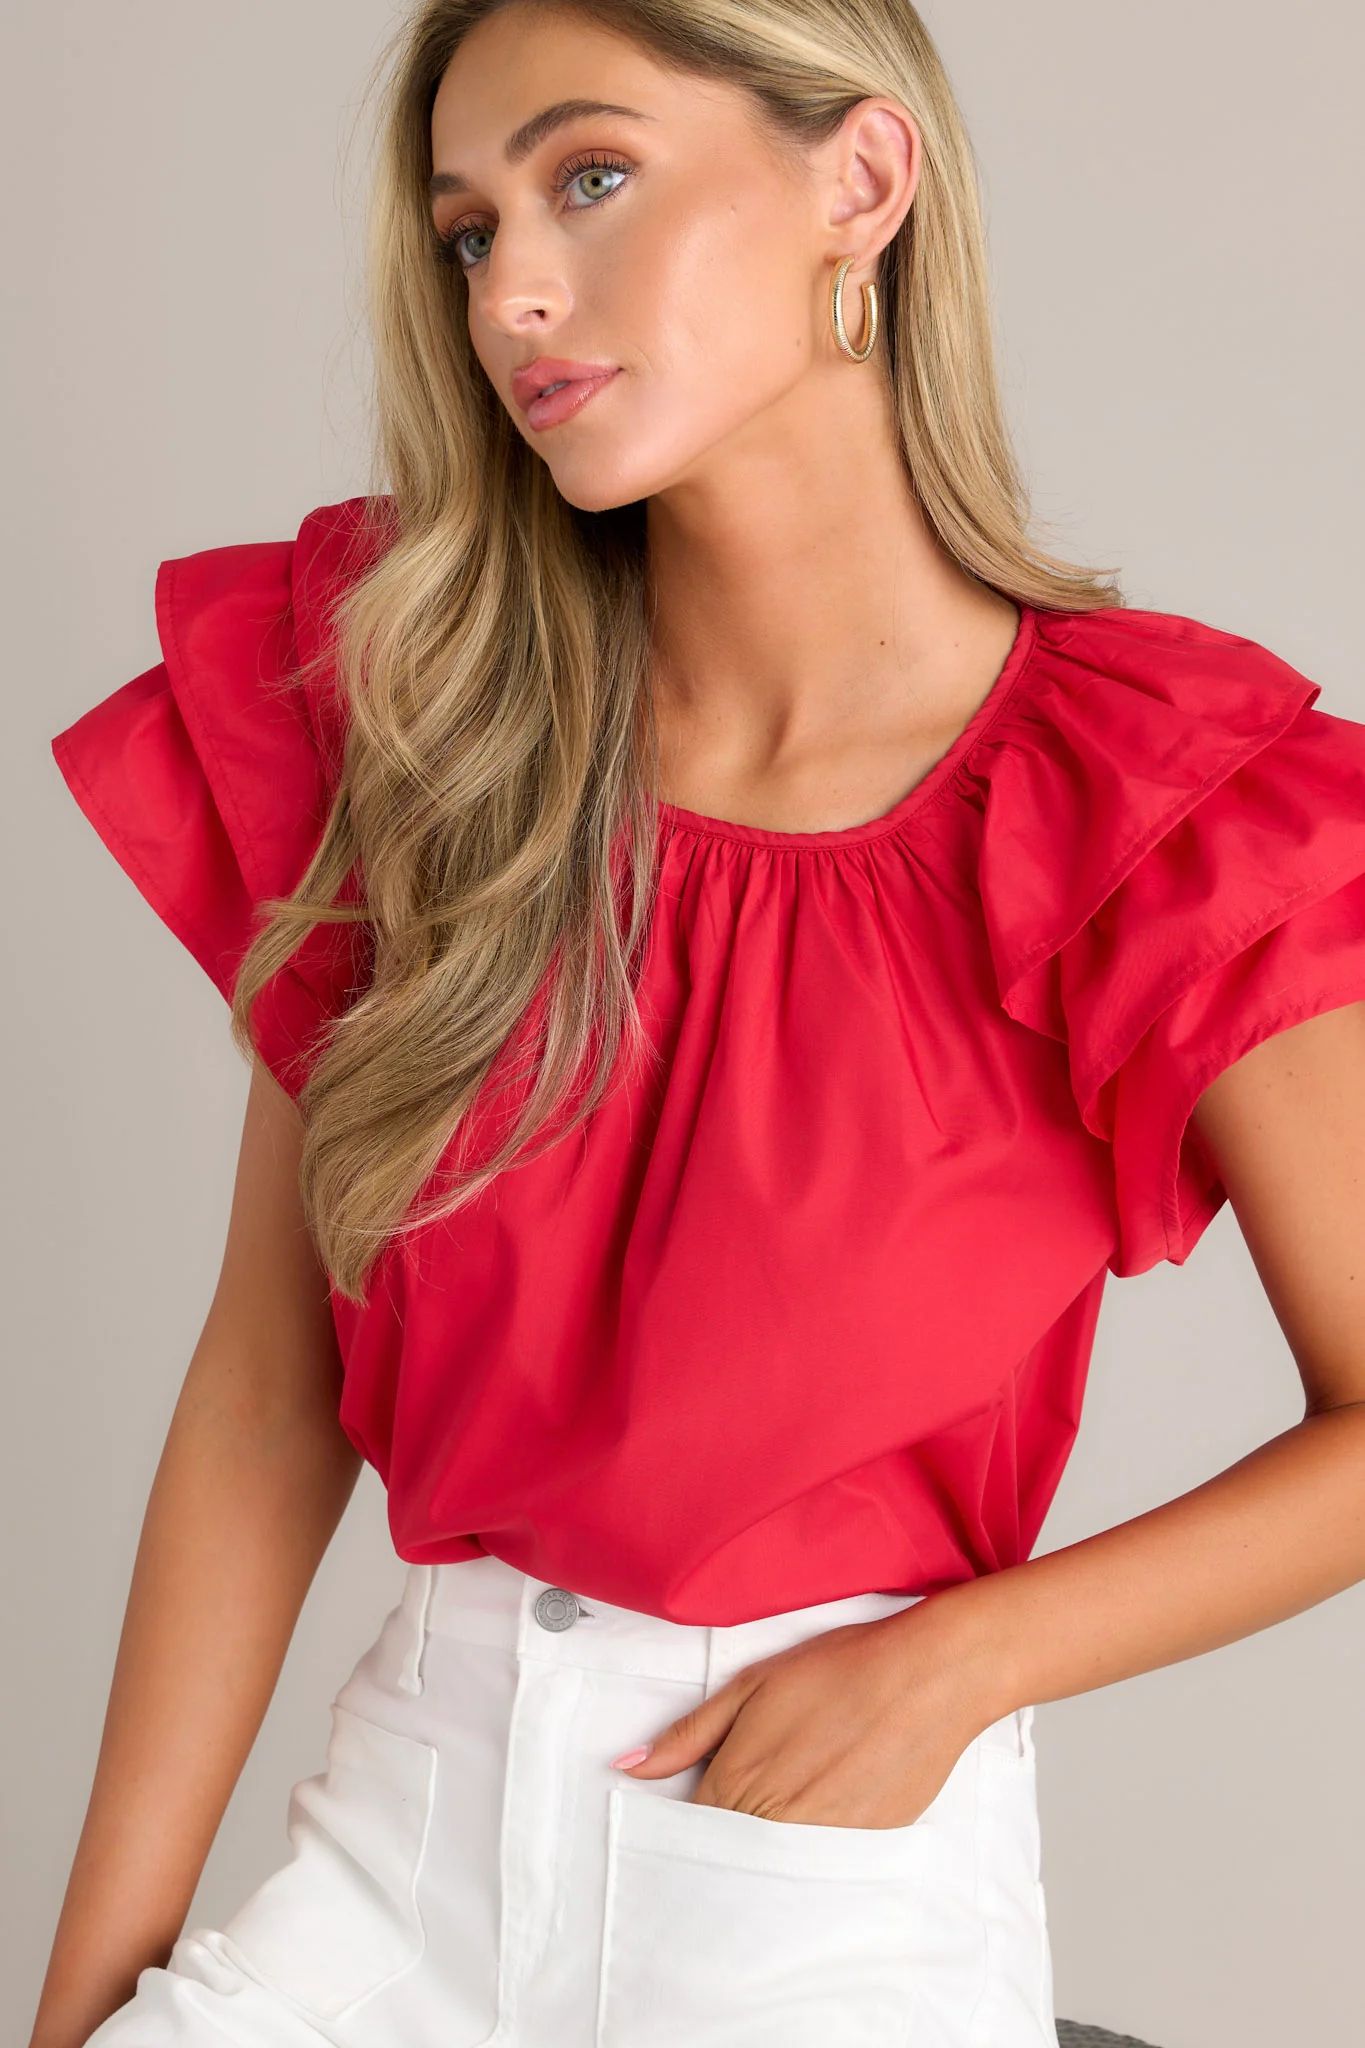 Everyday Radiance Red Ruffle Sleeve Top | Red Dress